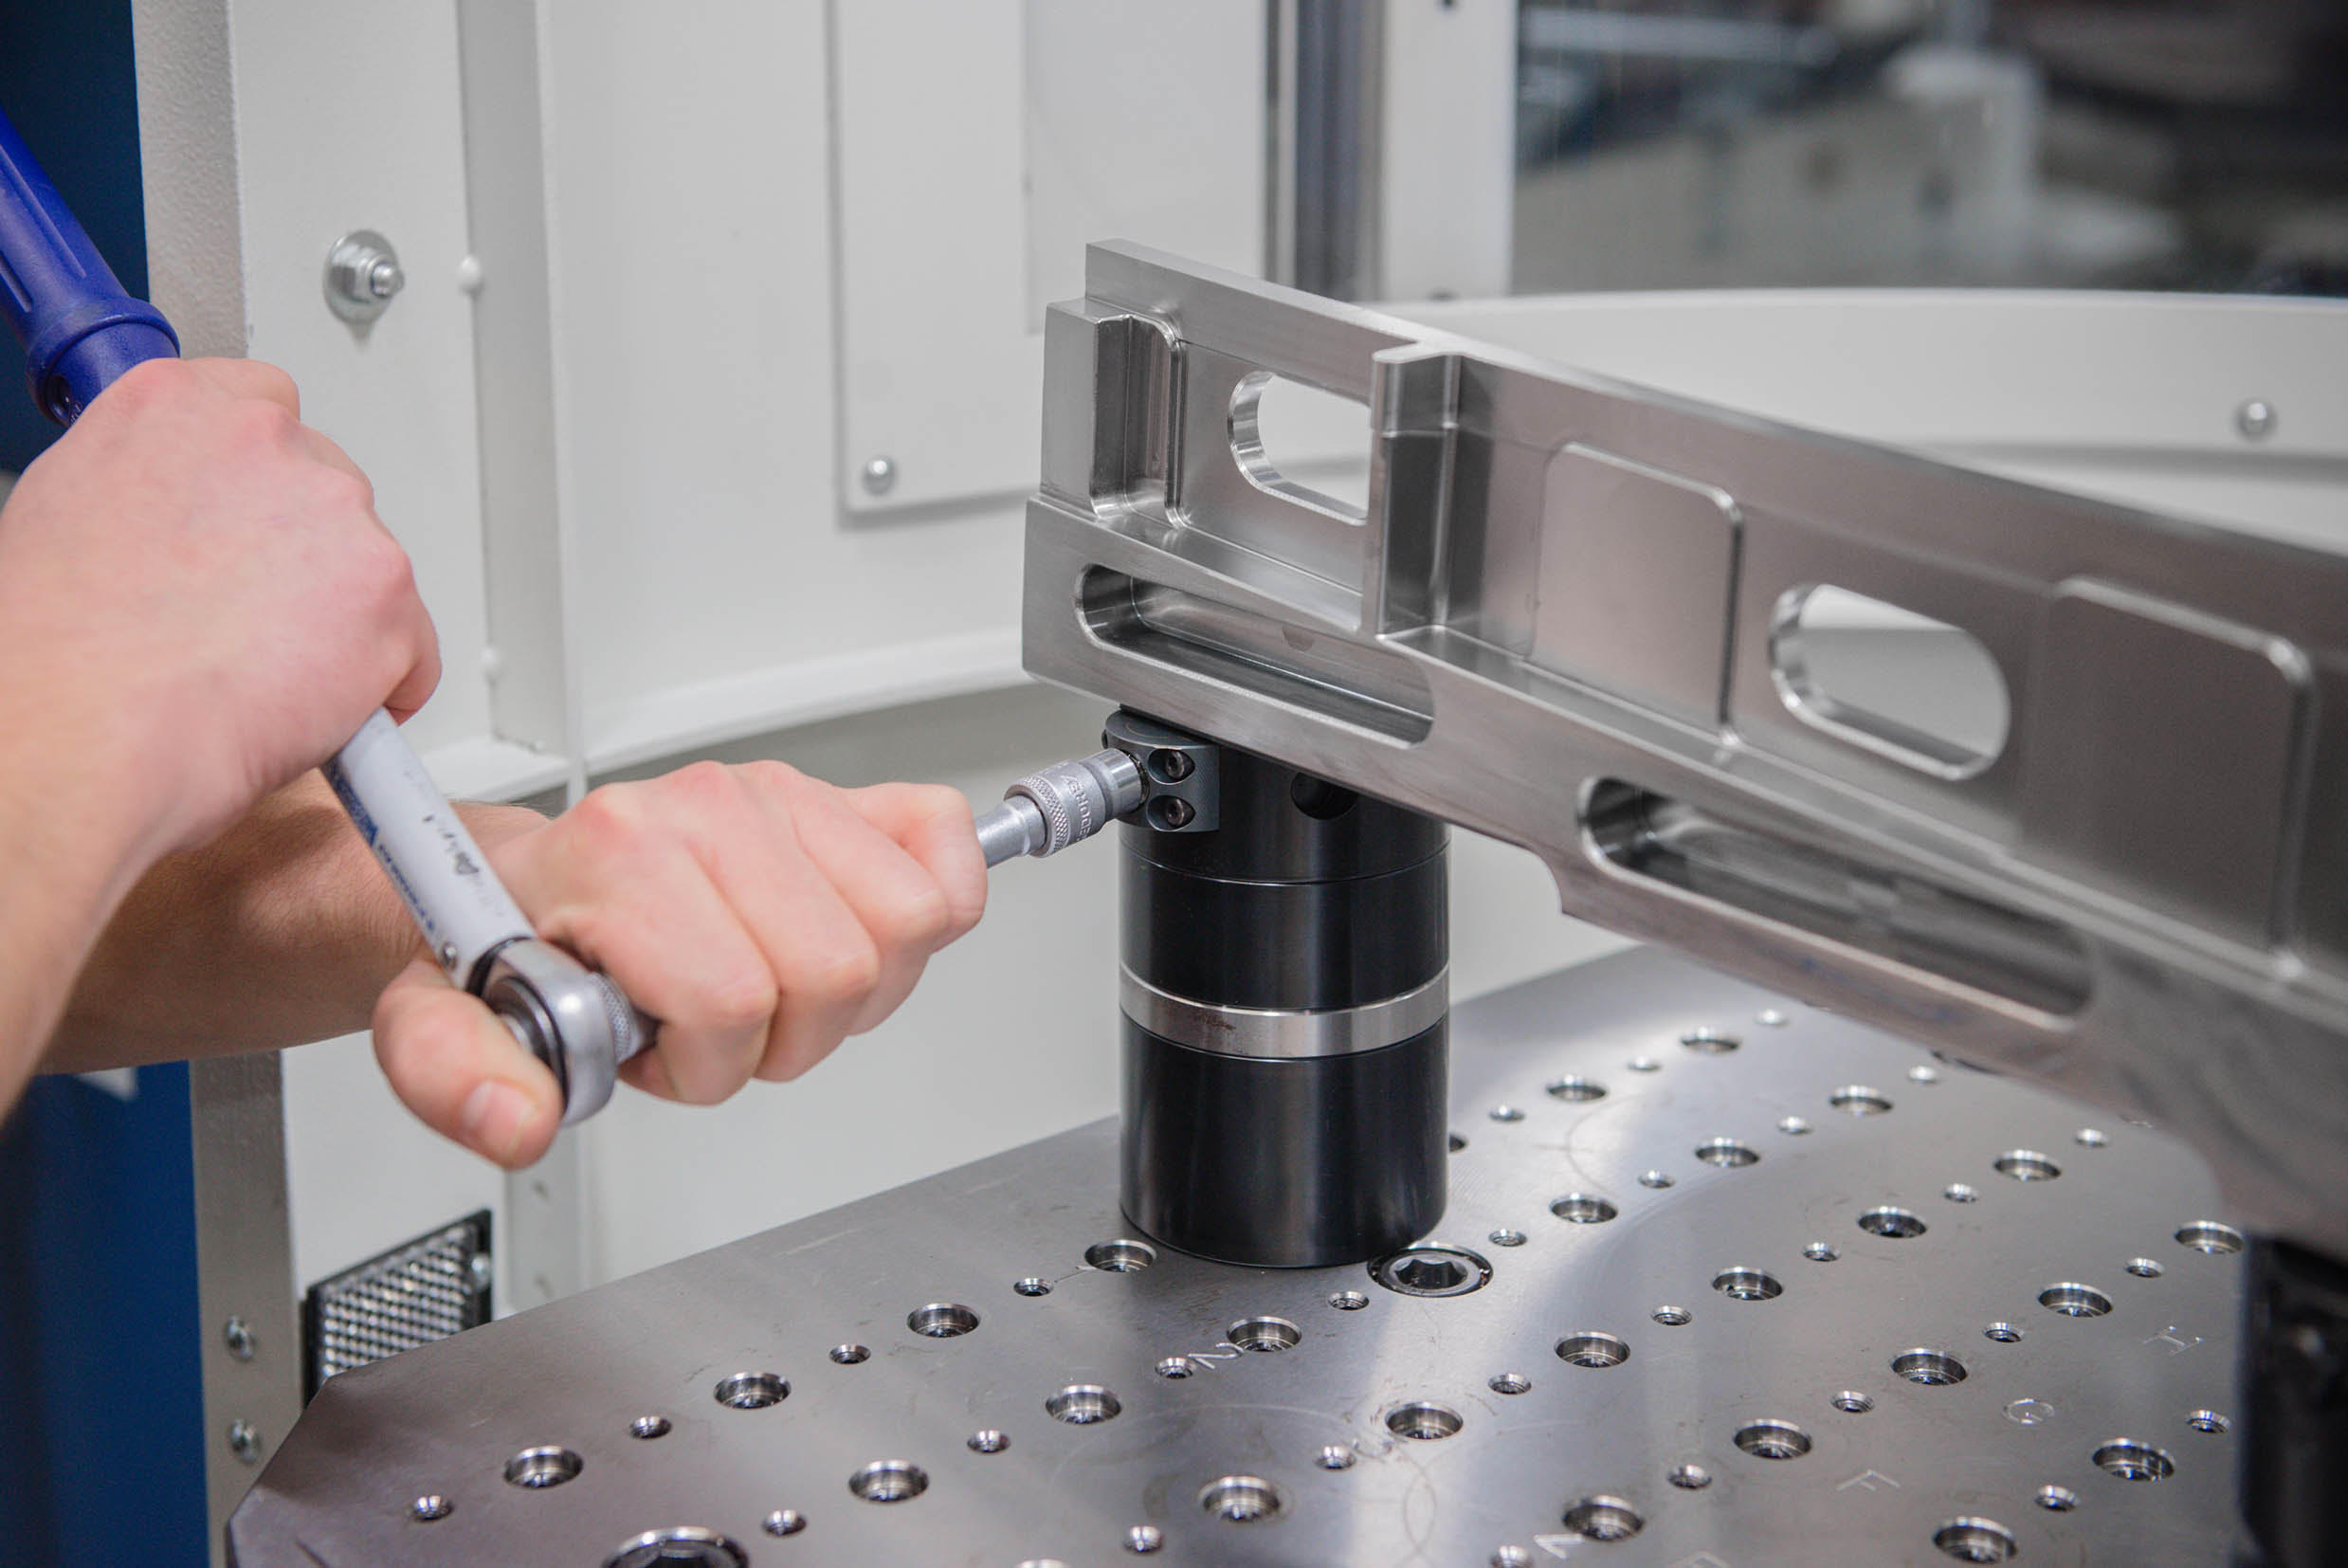 Minimize set-up times with AMF zero-point clamping technology: the workpiece is clamped in just a few simple steps.